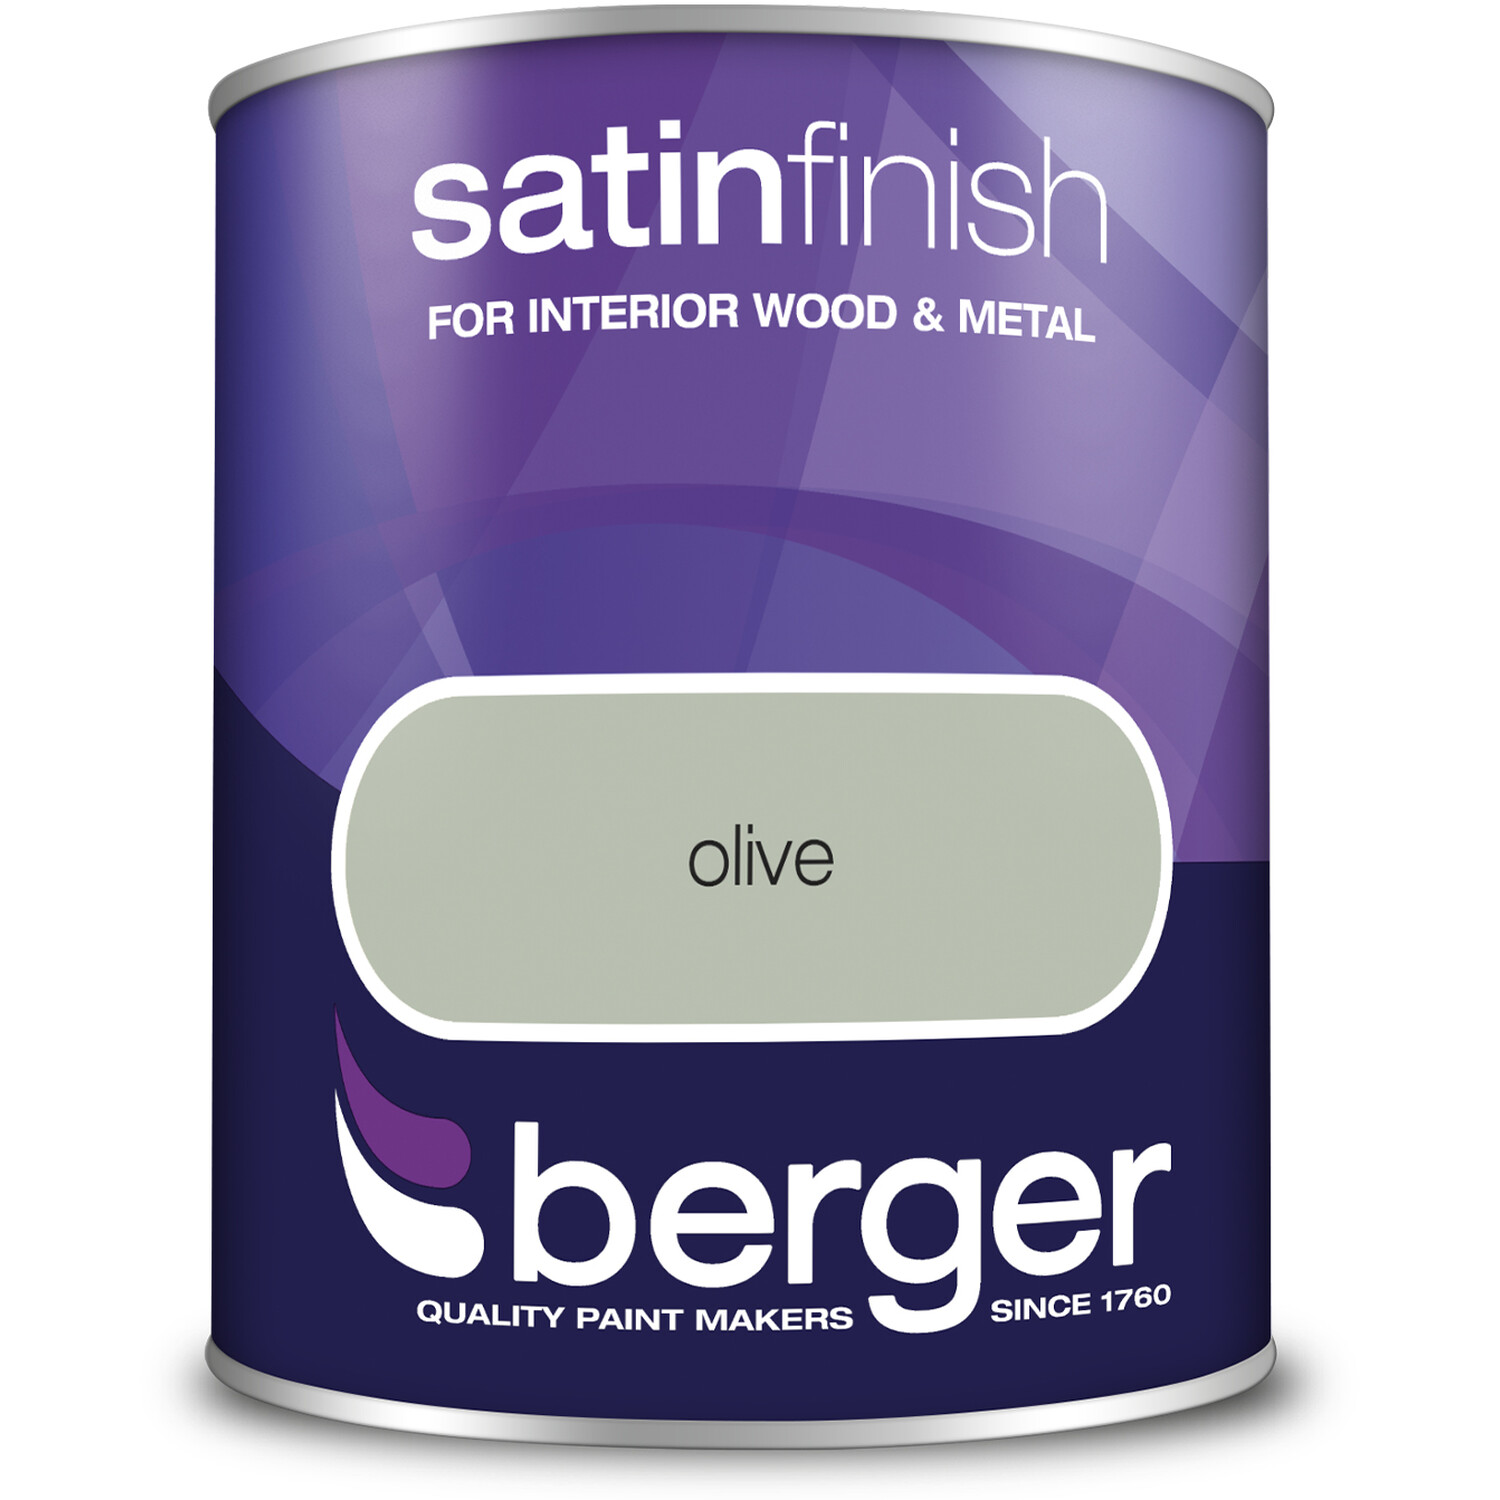 Berger Wood and Metal Olive Satin Finish Paint 750ml Image 2